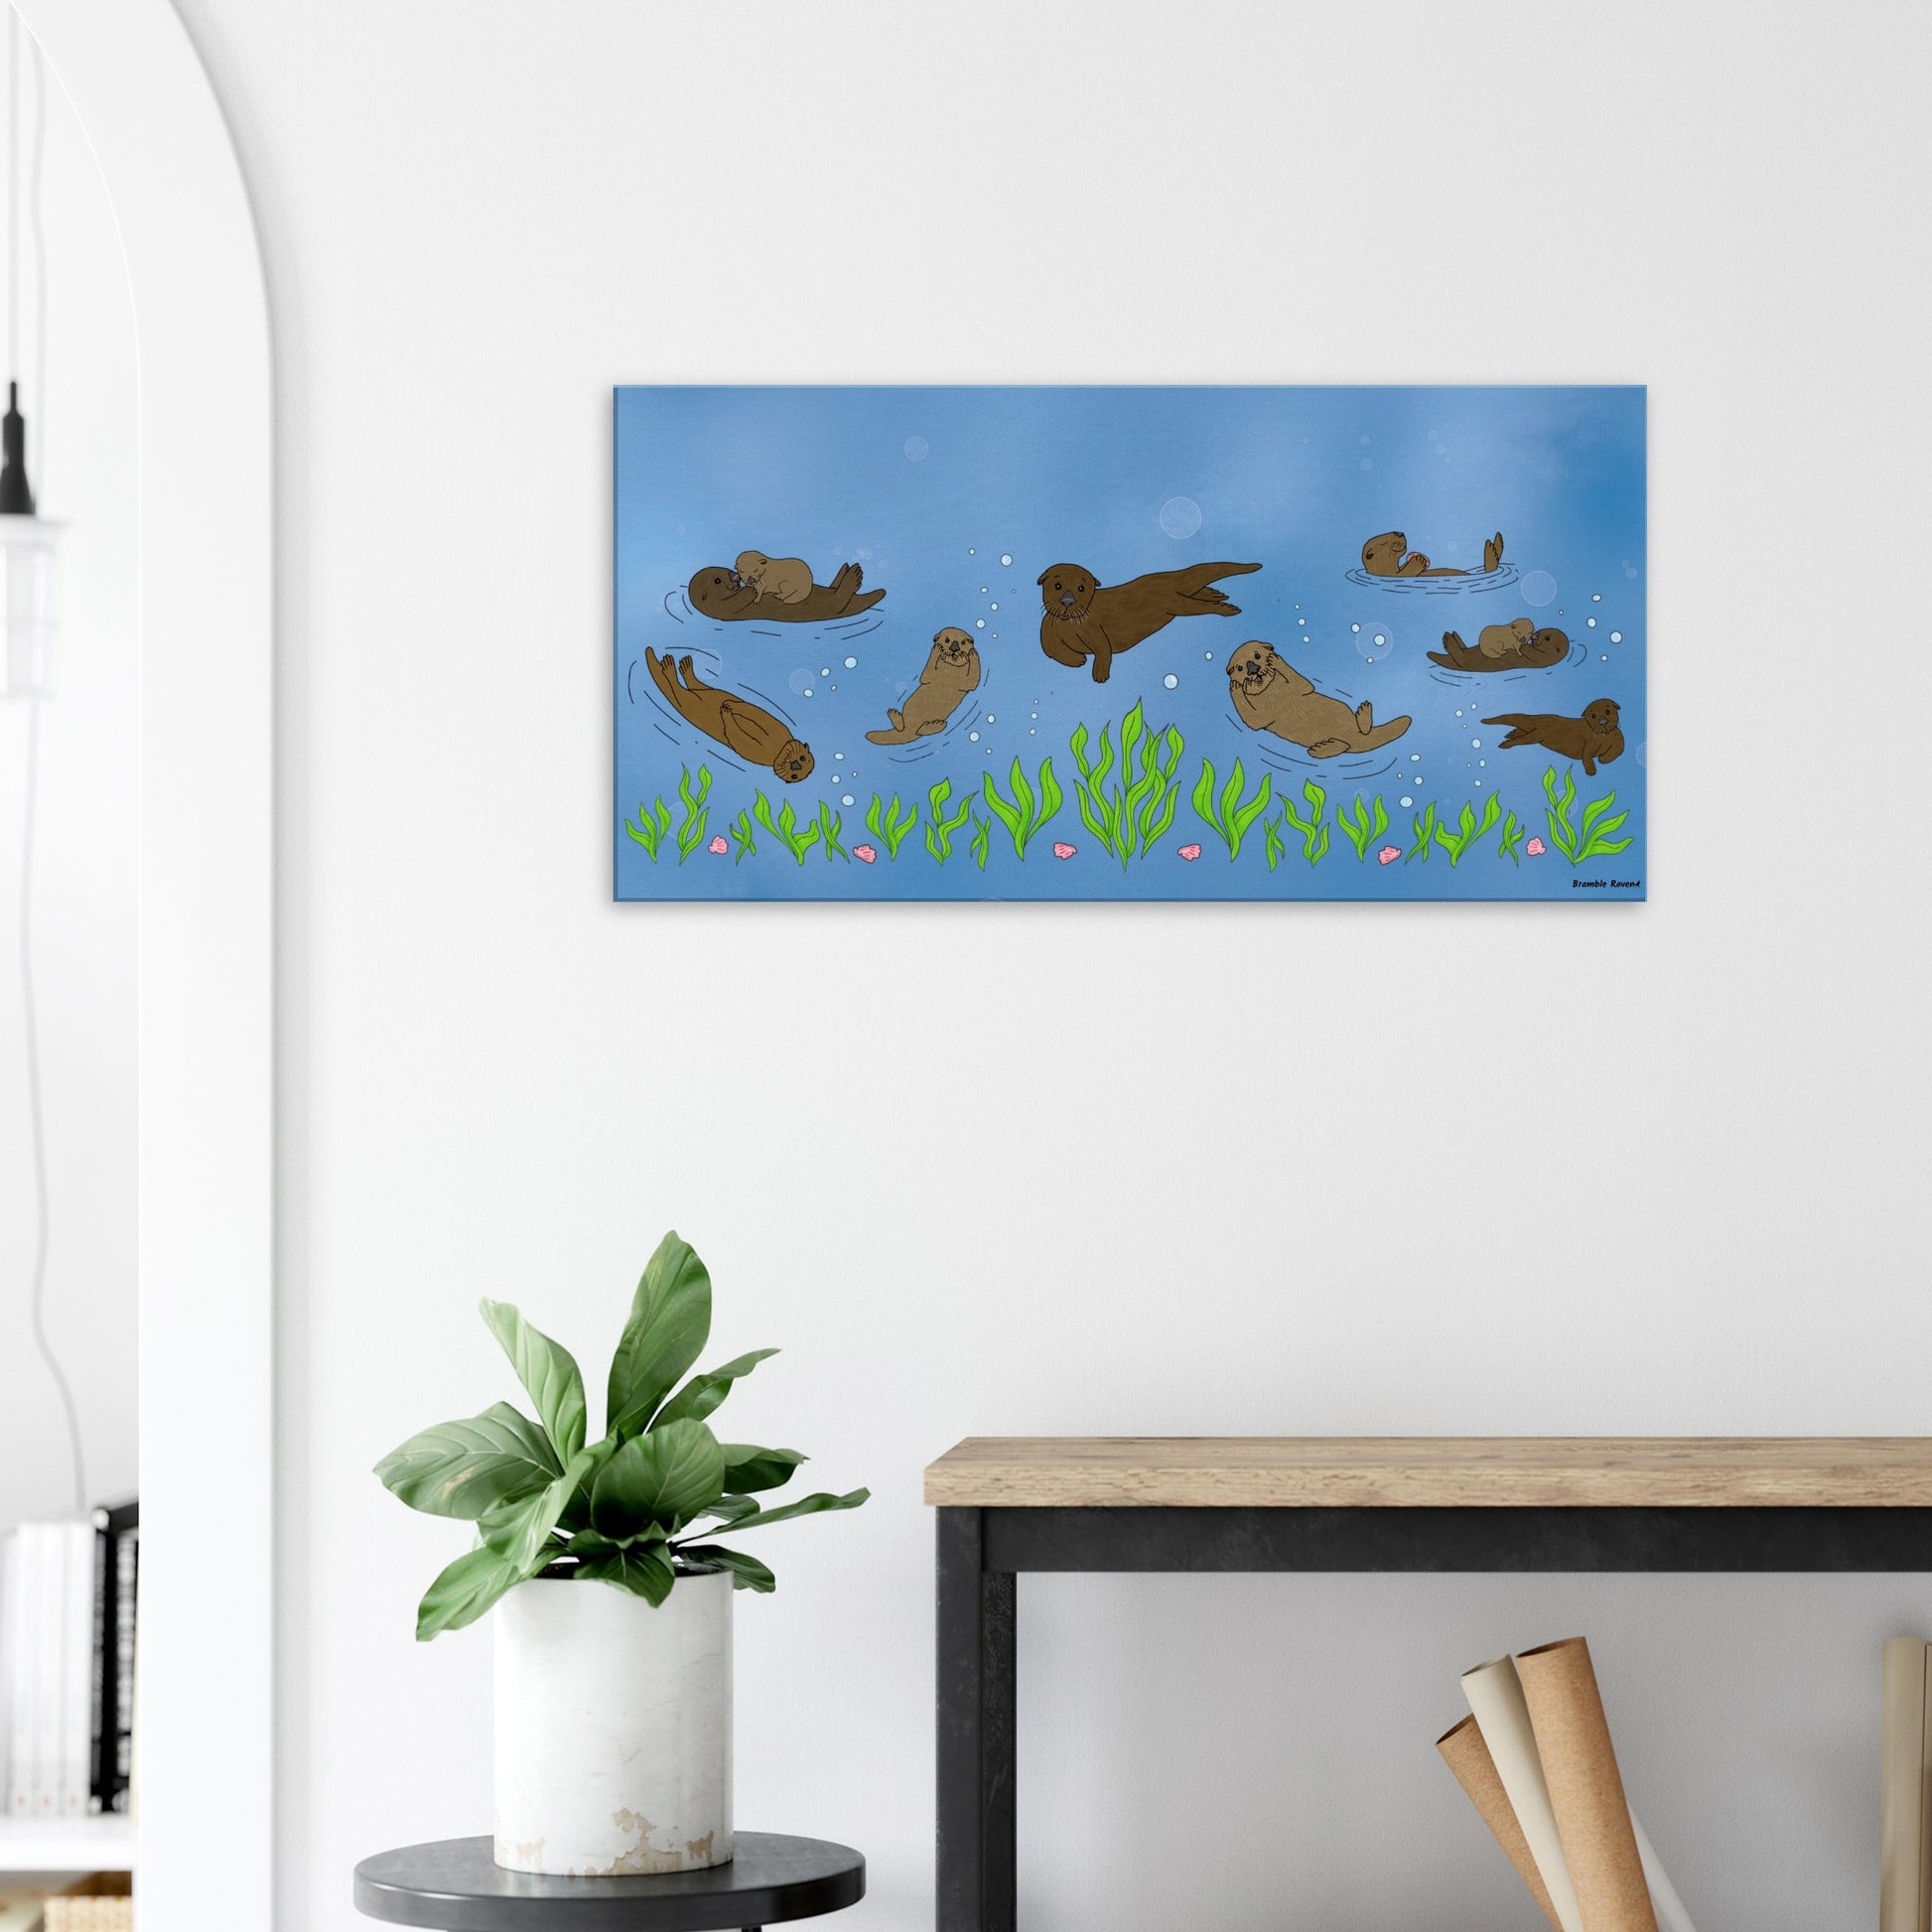 20 by 40 inch slim canvas wall art print of sea otters swimming along the seabed. Shown on wall above wooden end table and potted plant.